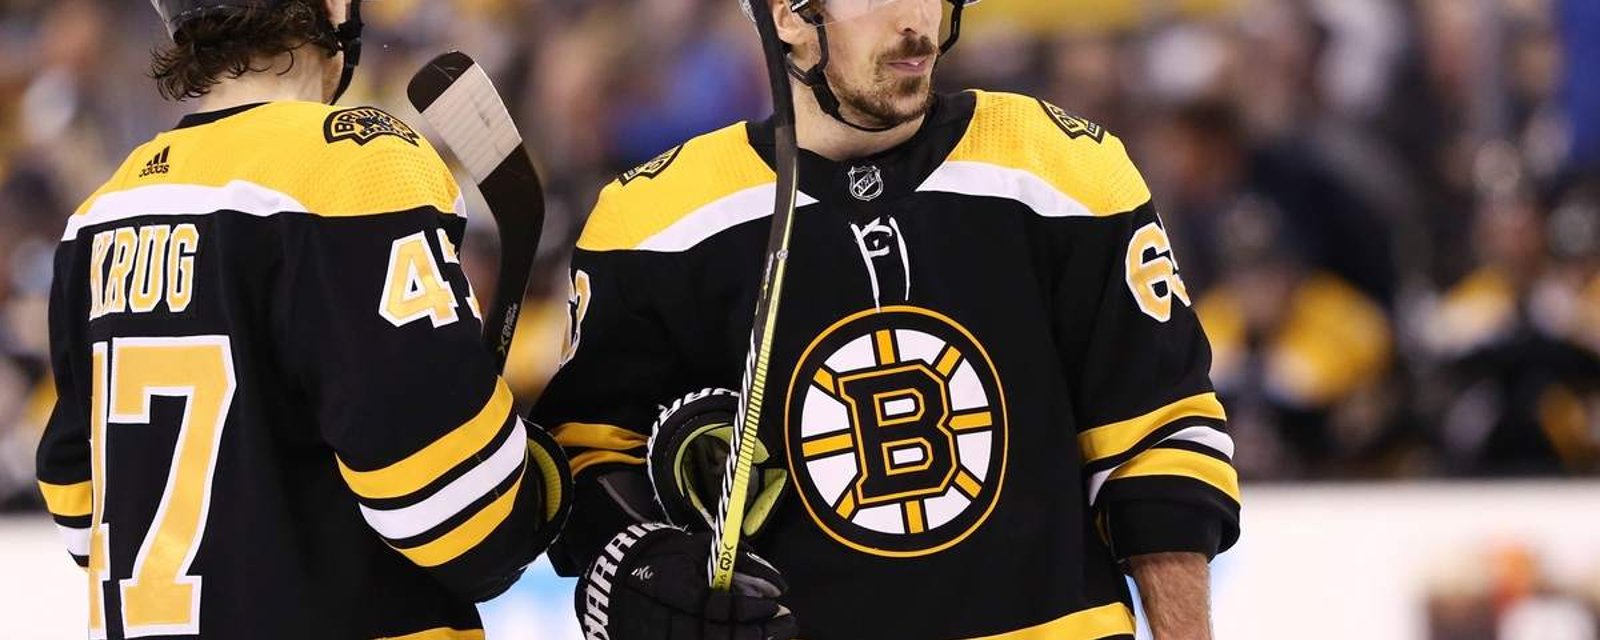 Marchand targets teammate Krug in first ruthless Instagram post!